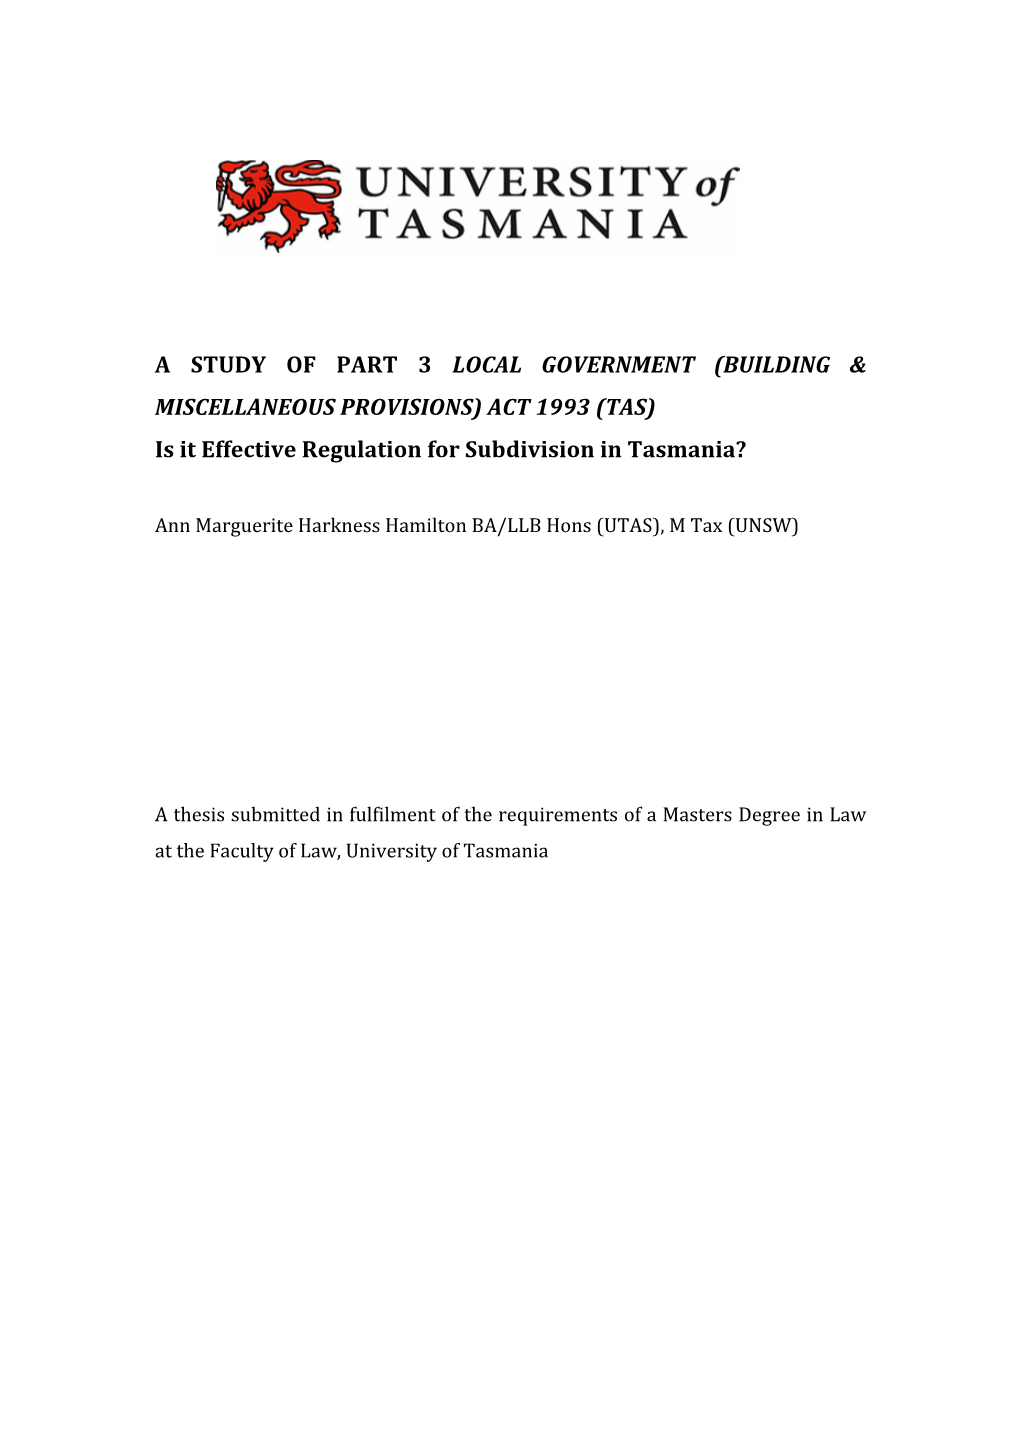 Building & Miscellaneous Provisions) Act 1993 (Tas